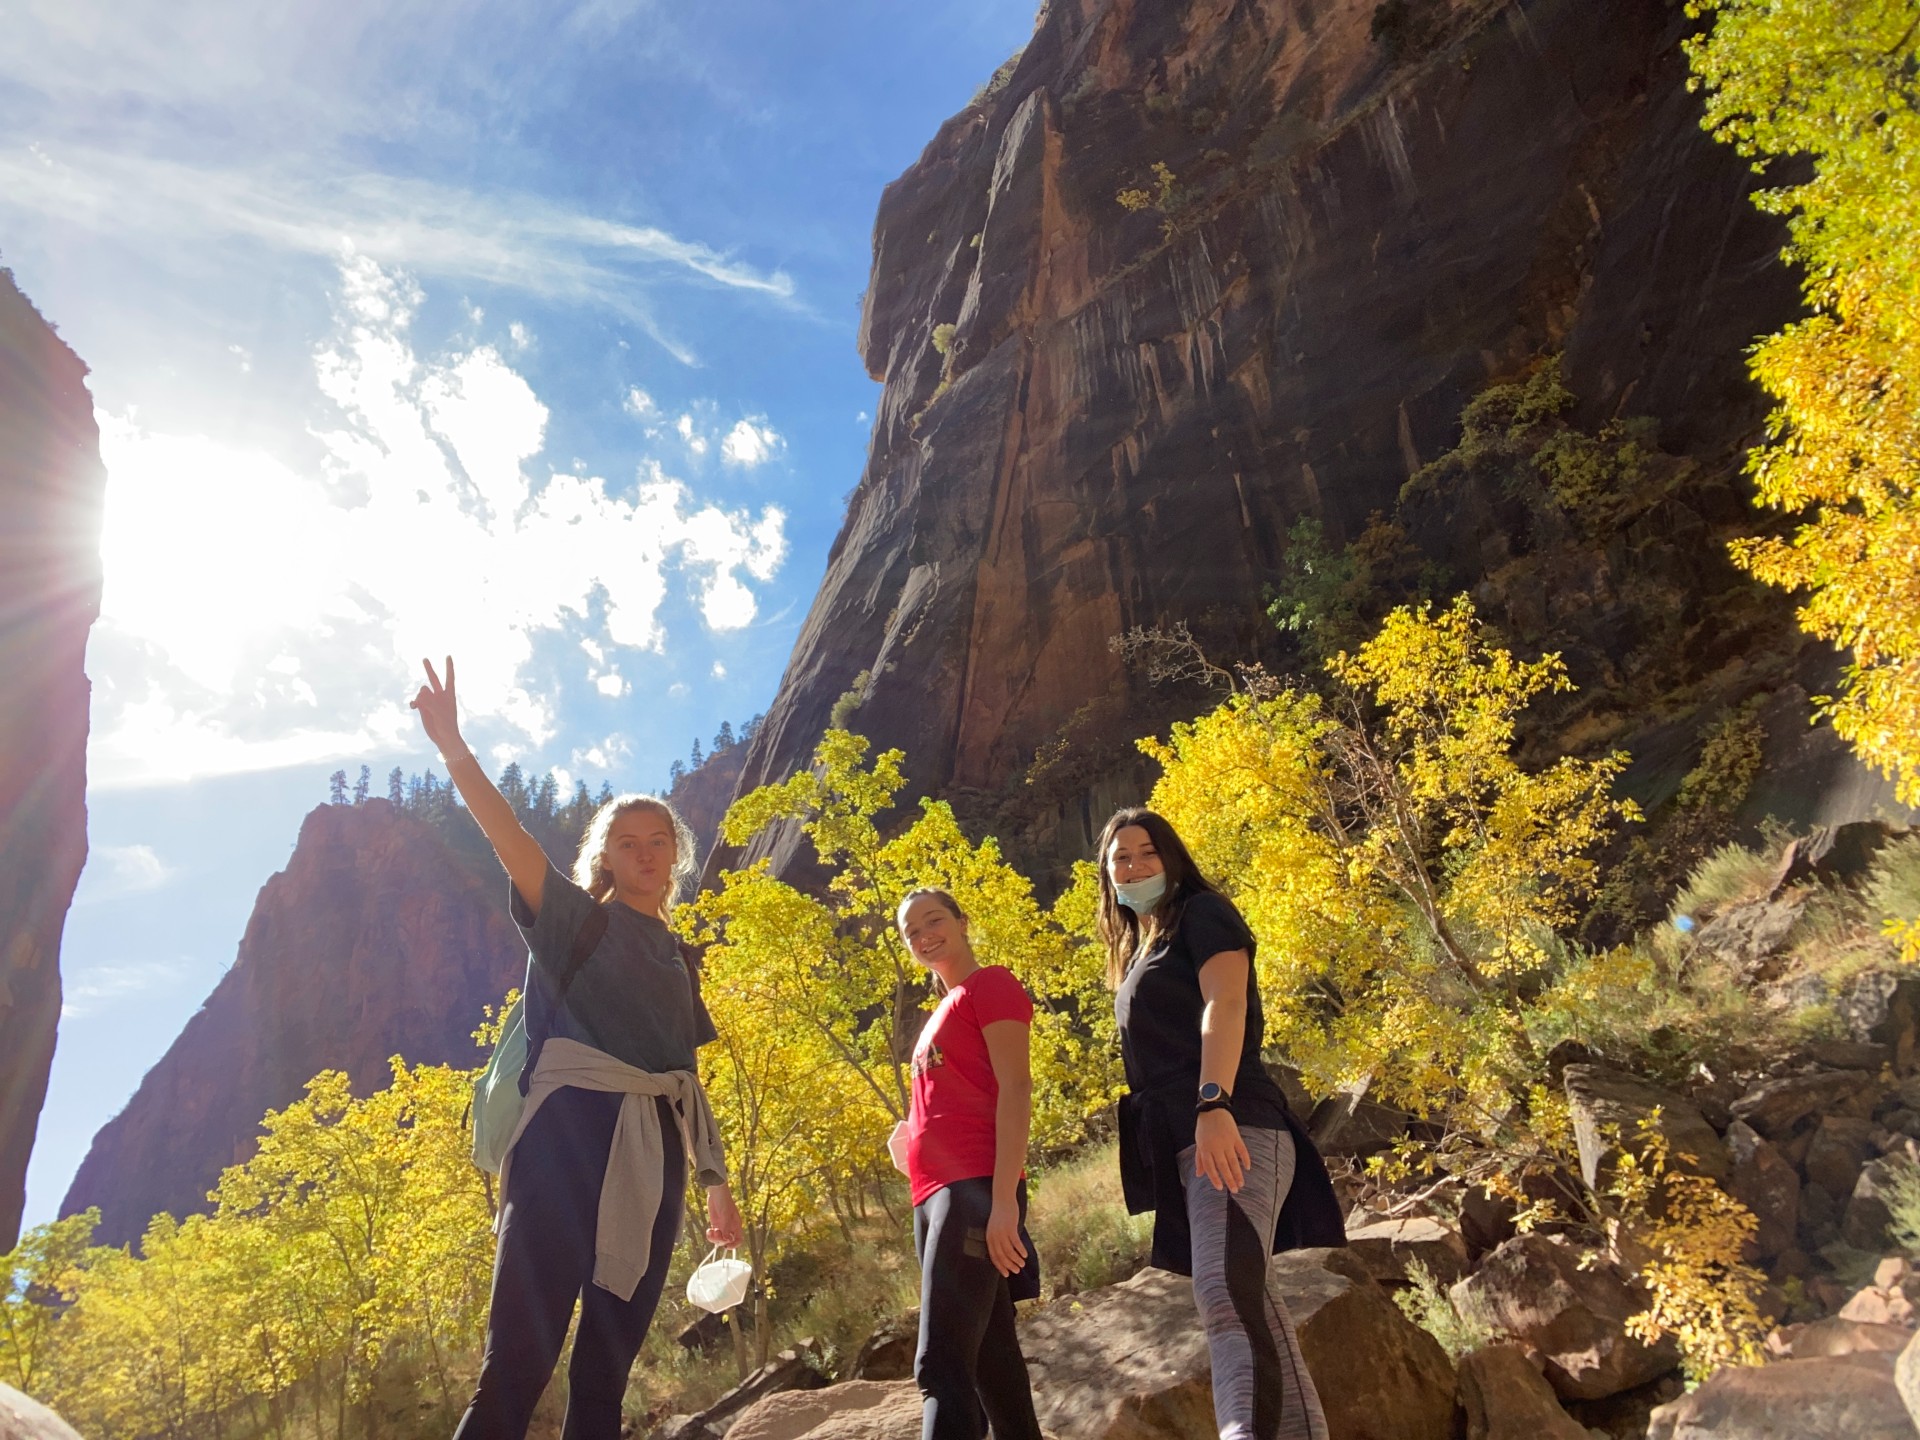 Three students hiking in rocky Utah with yellow tree leaves in background